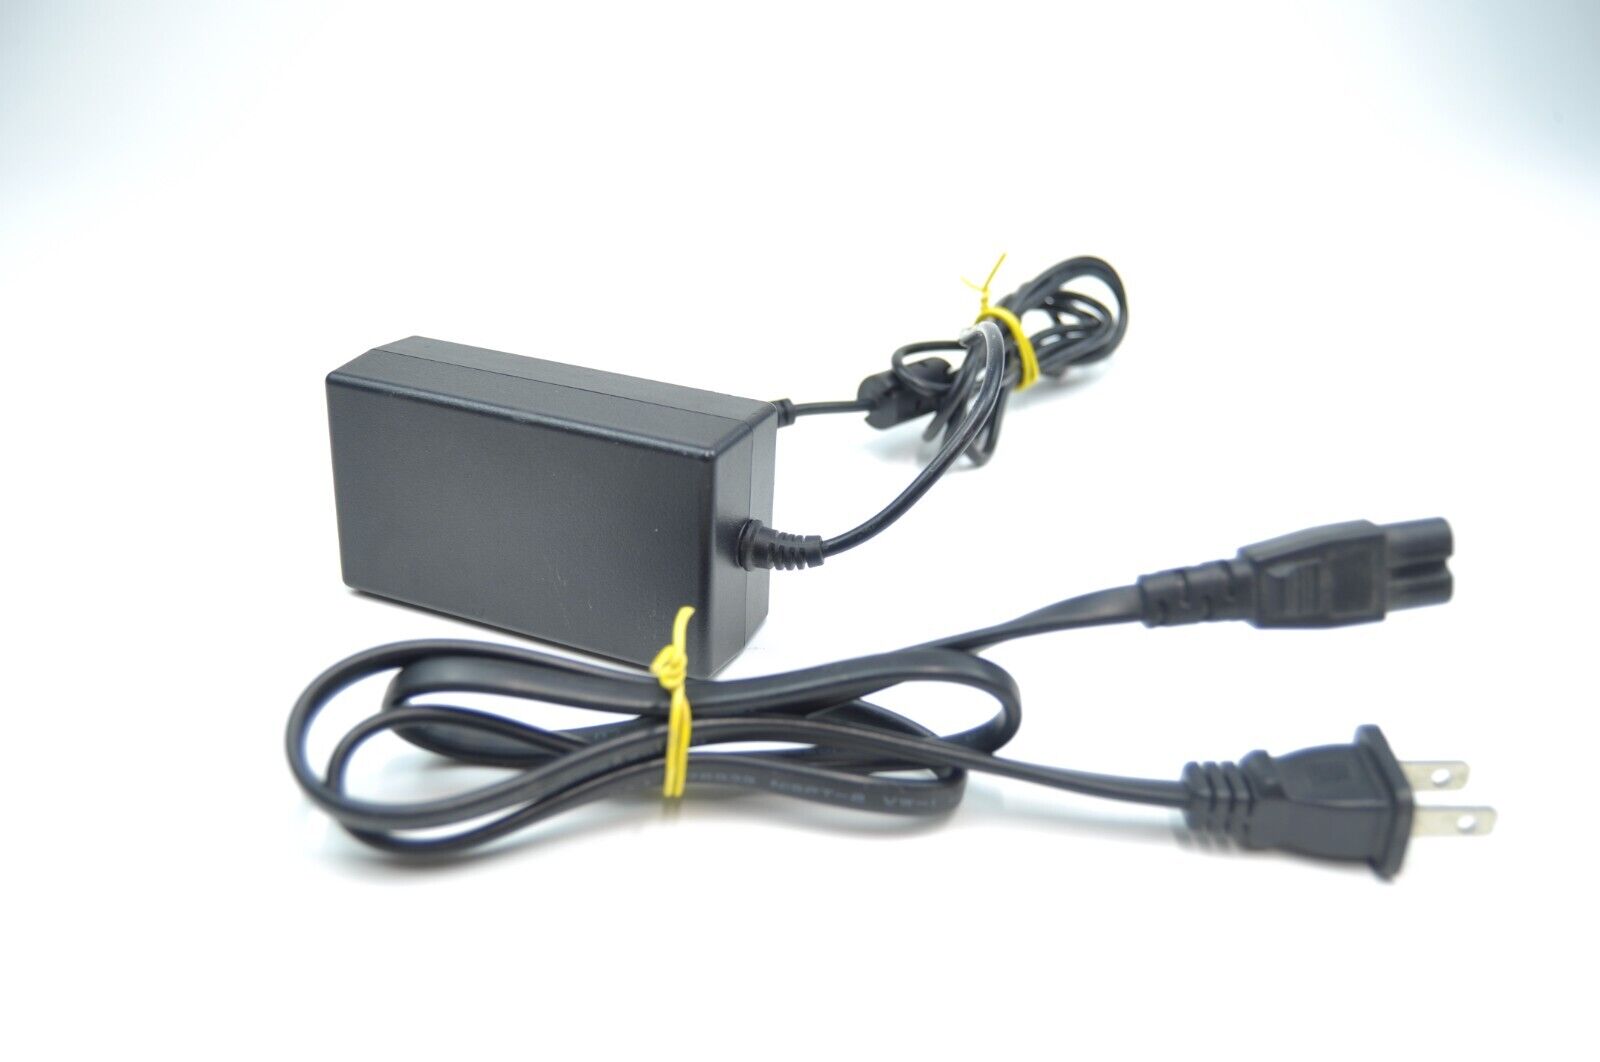 DURA MICRO DM5133 100V-240V To DC 12V 2A Switching AC Power Supply Adapter